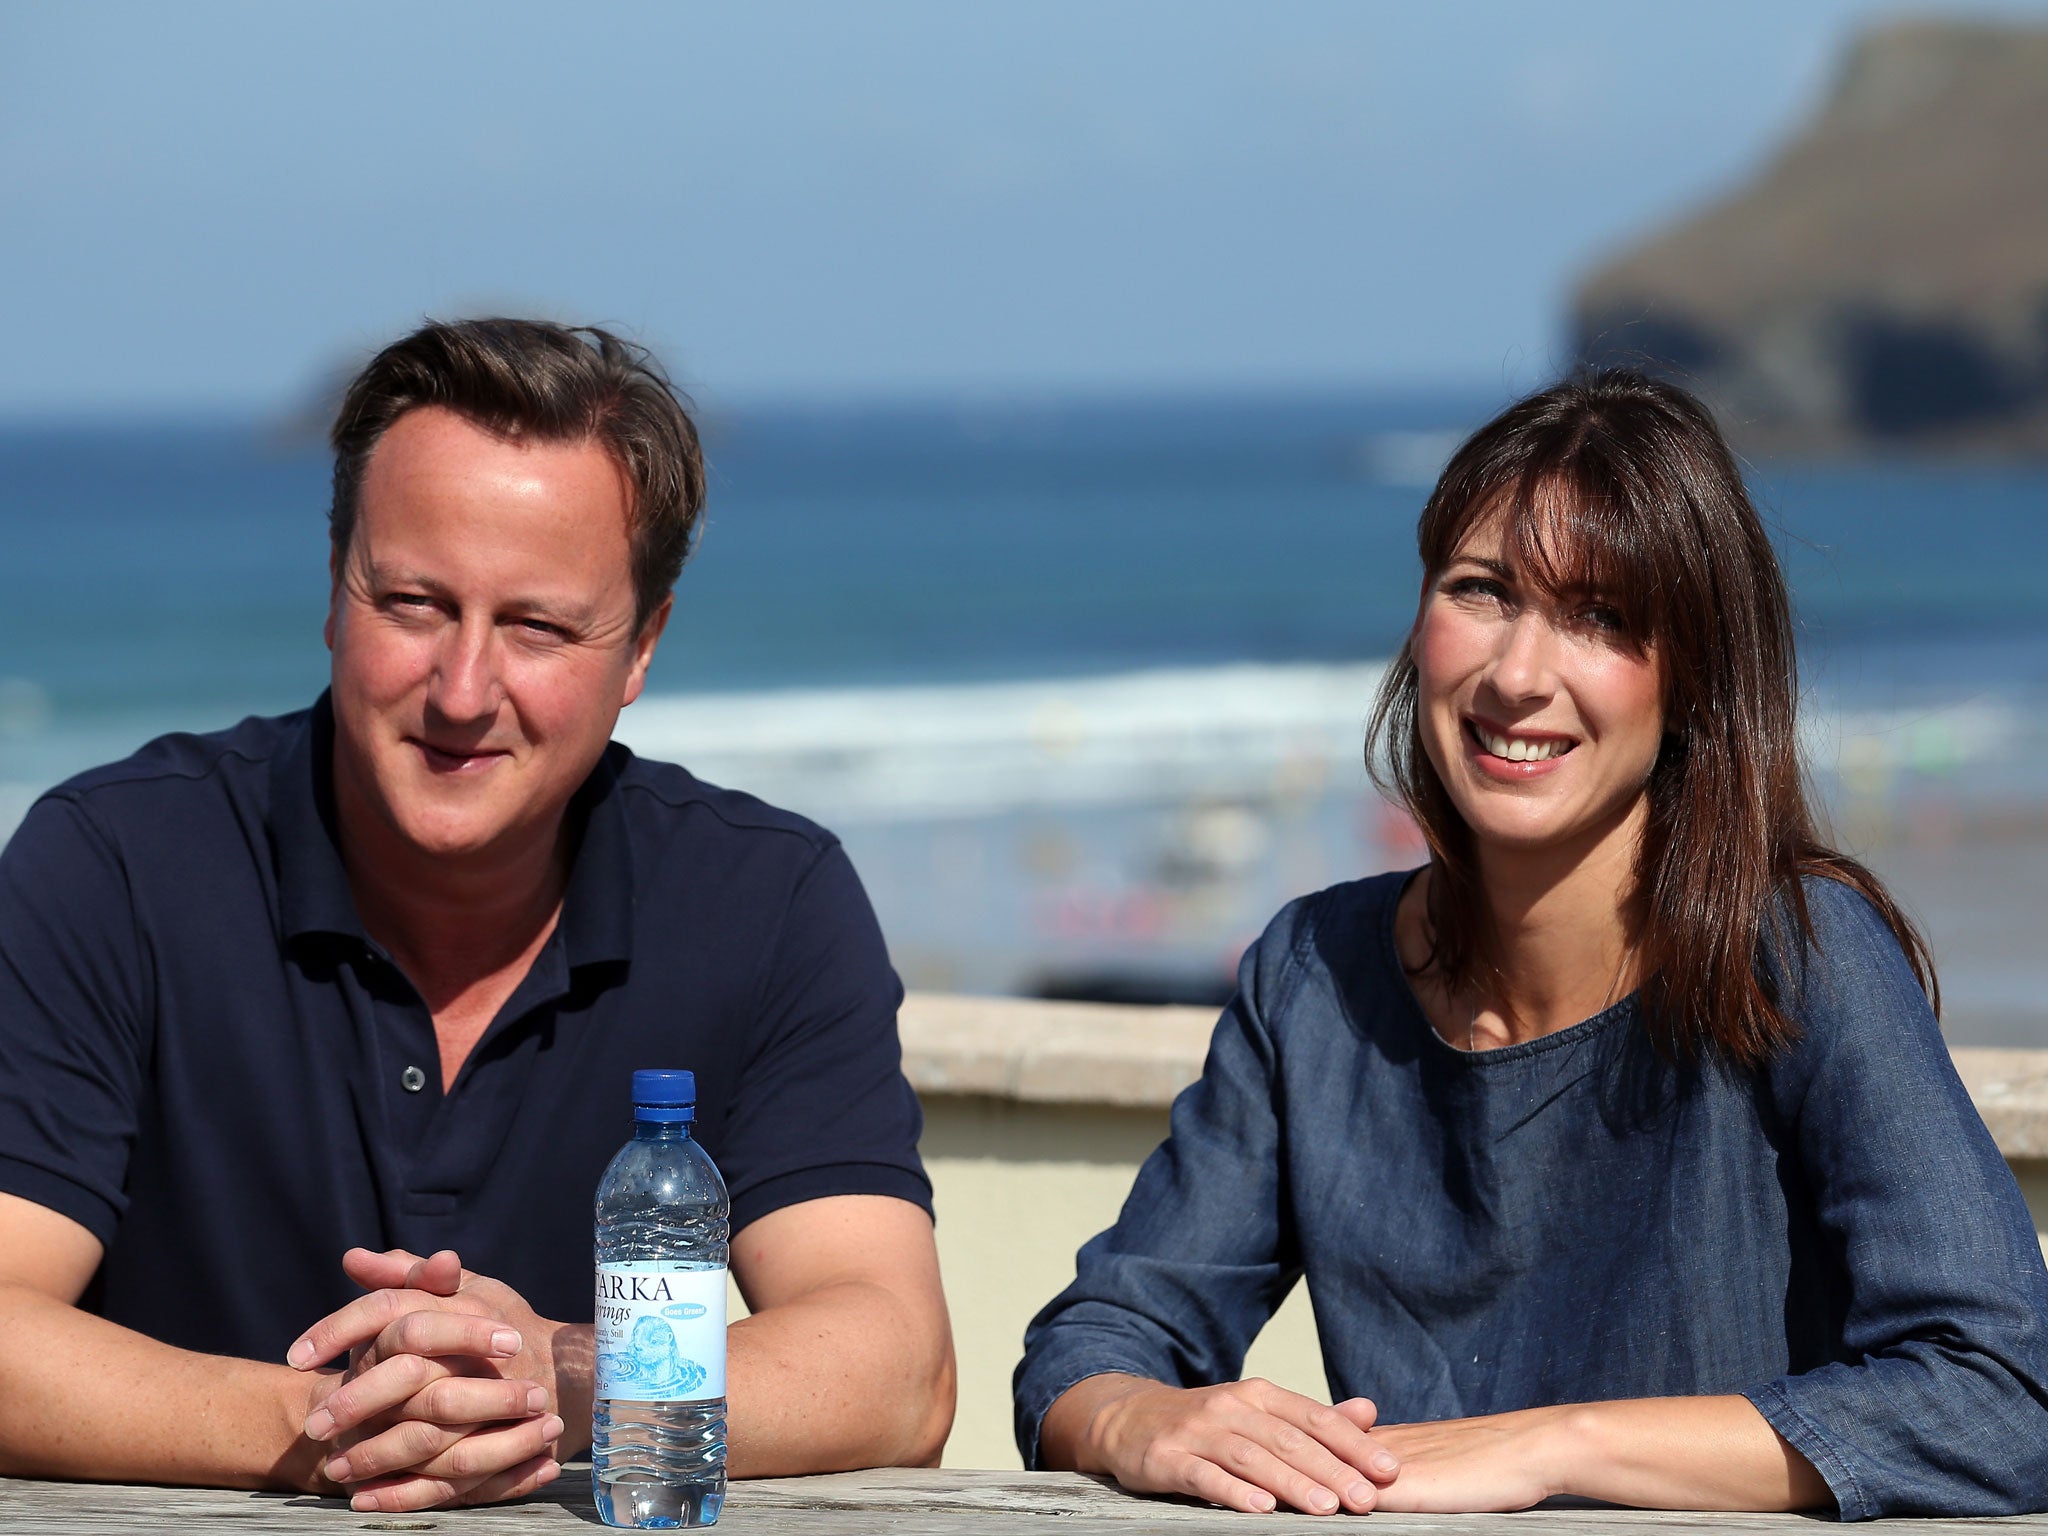 No 10 plays down reports this summer that Samantha Cameron was instrumental in persuading her husband to take military action against the Assad regime in Syria